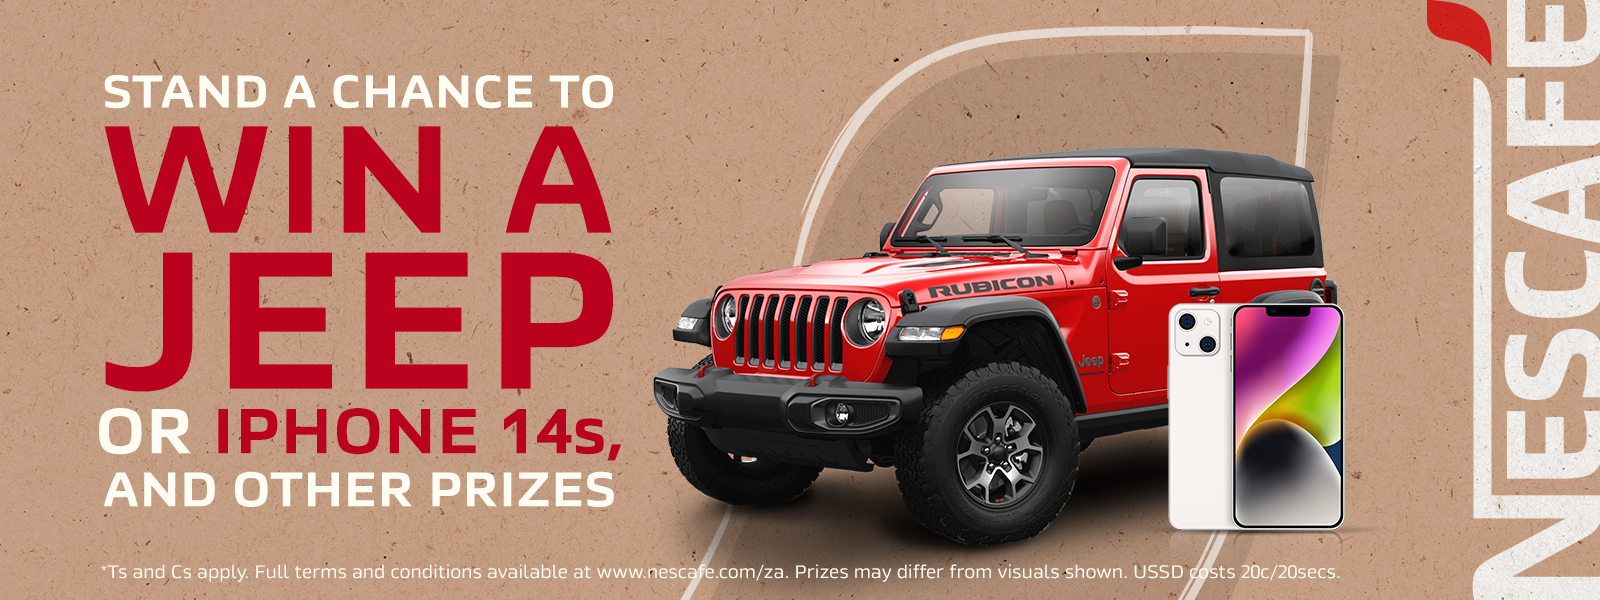 win a jeep or iphone 14s